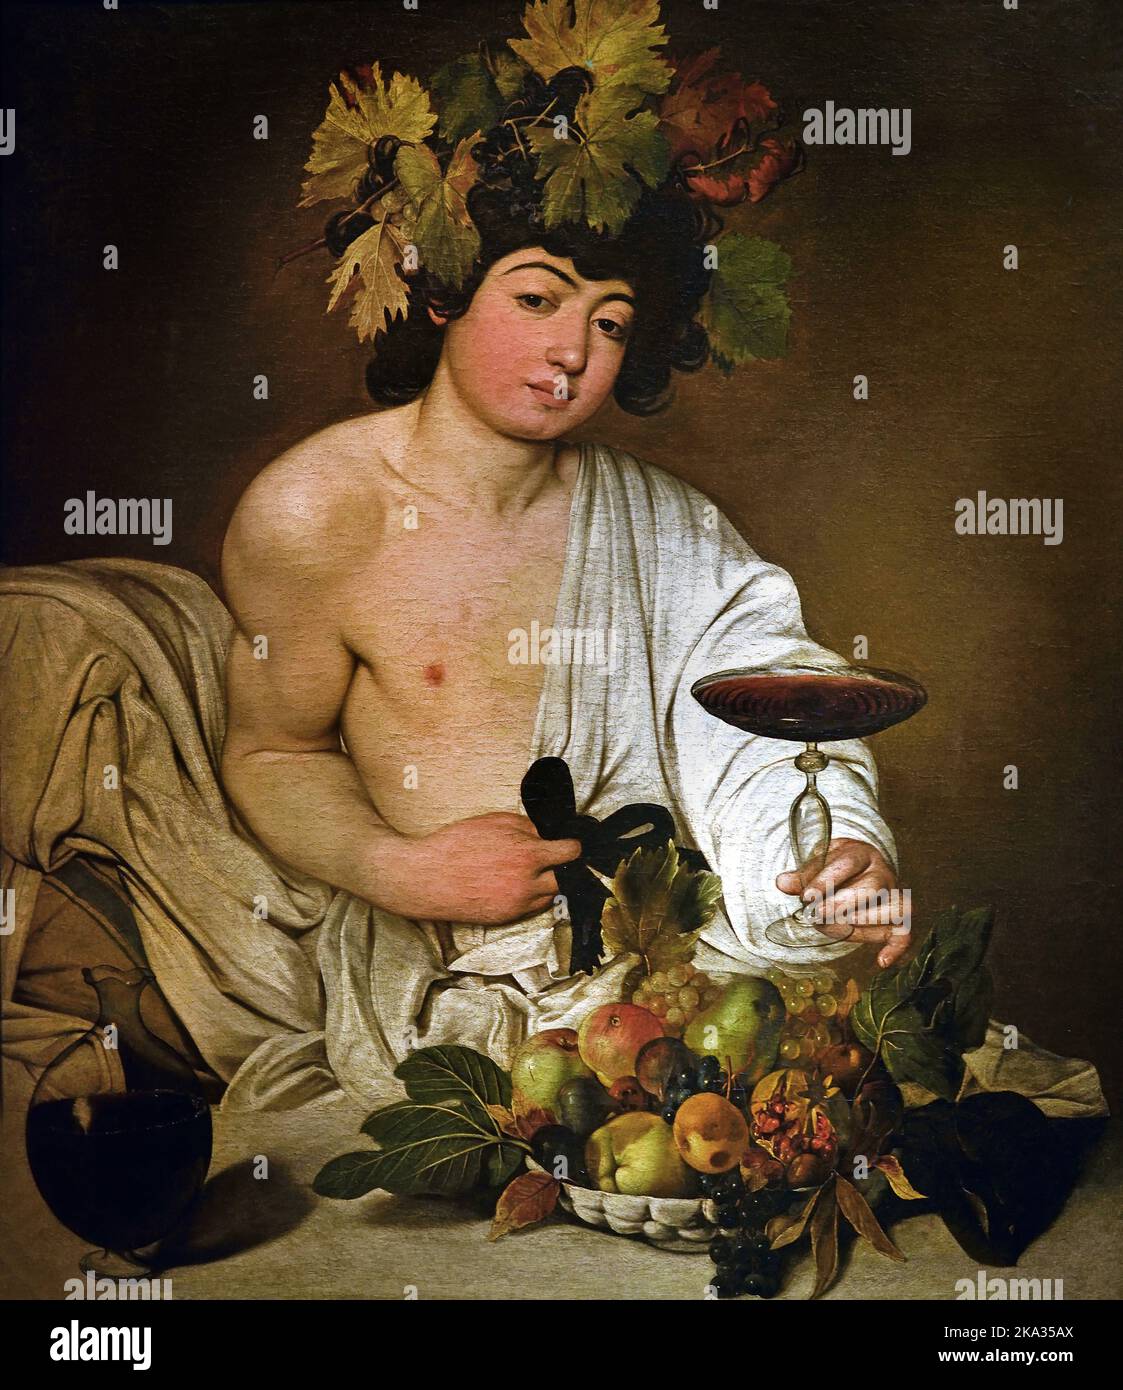 Bacchus, by  Michelangelo Merisi, known as Caravaggio (Milano 1571 - Porto Ercole 1610) , Florence, Italy. ( His depiction of the basket of fruit and the cup of wine proffered by the god is surprising, with such elements interpreted by some critics as a Horatian invitation to frugality, conviviality and friendship. ) Stock Photo